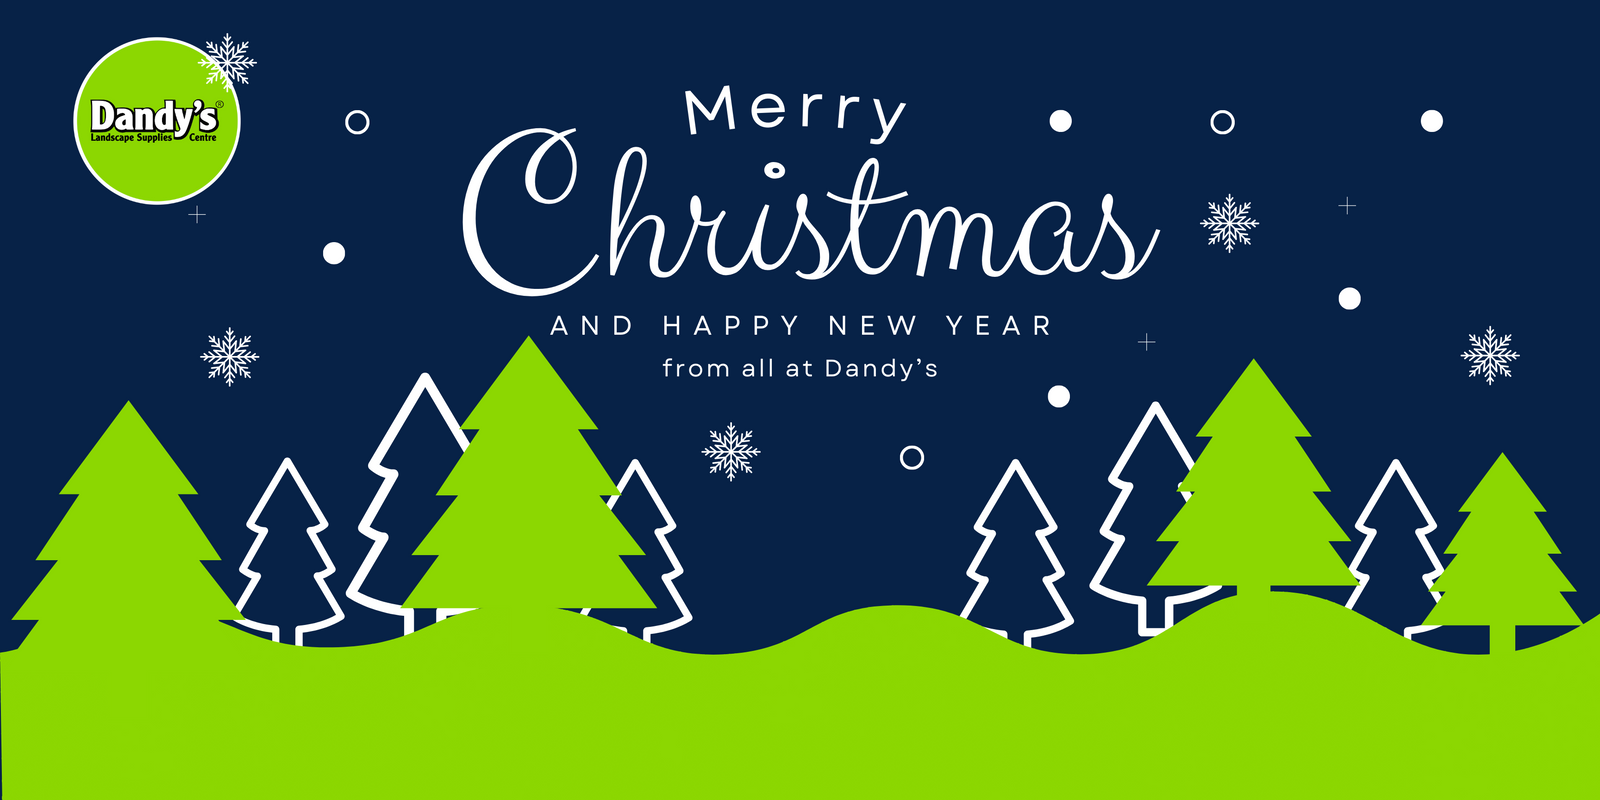 Merry Christmas from All at Dandy's